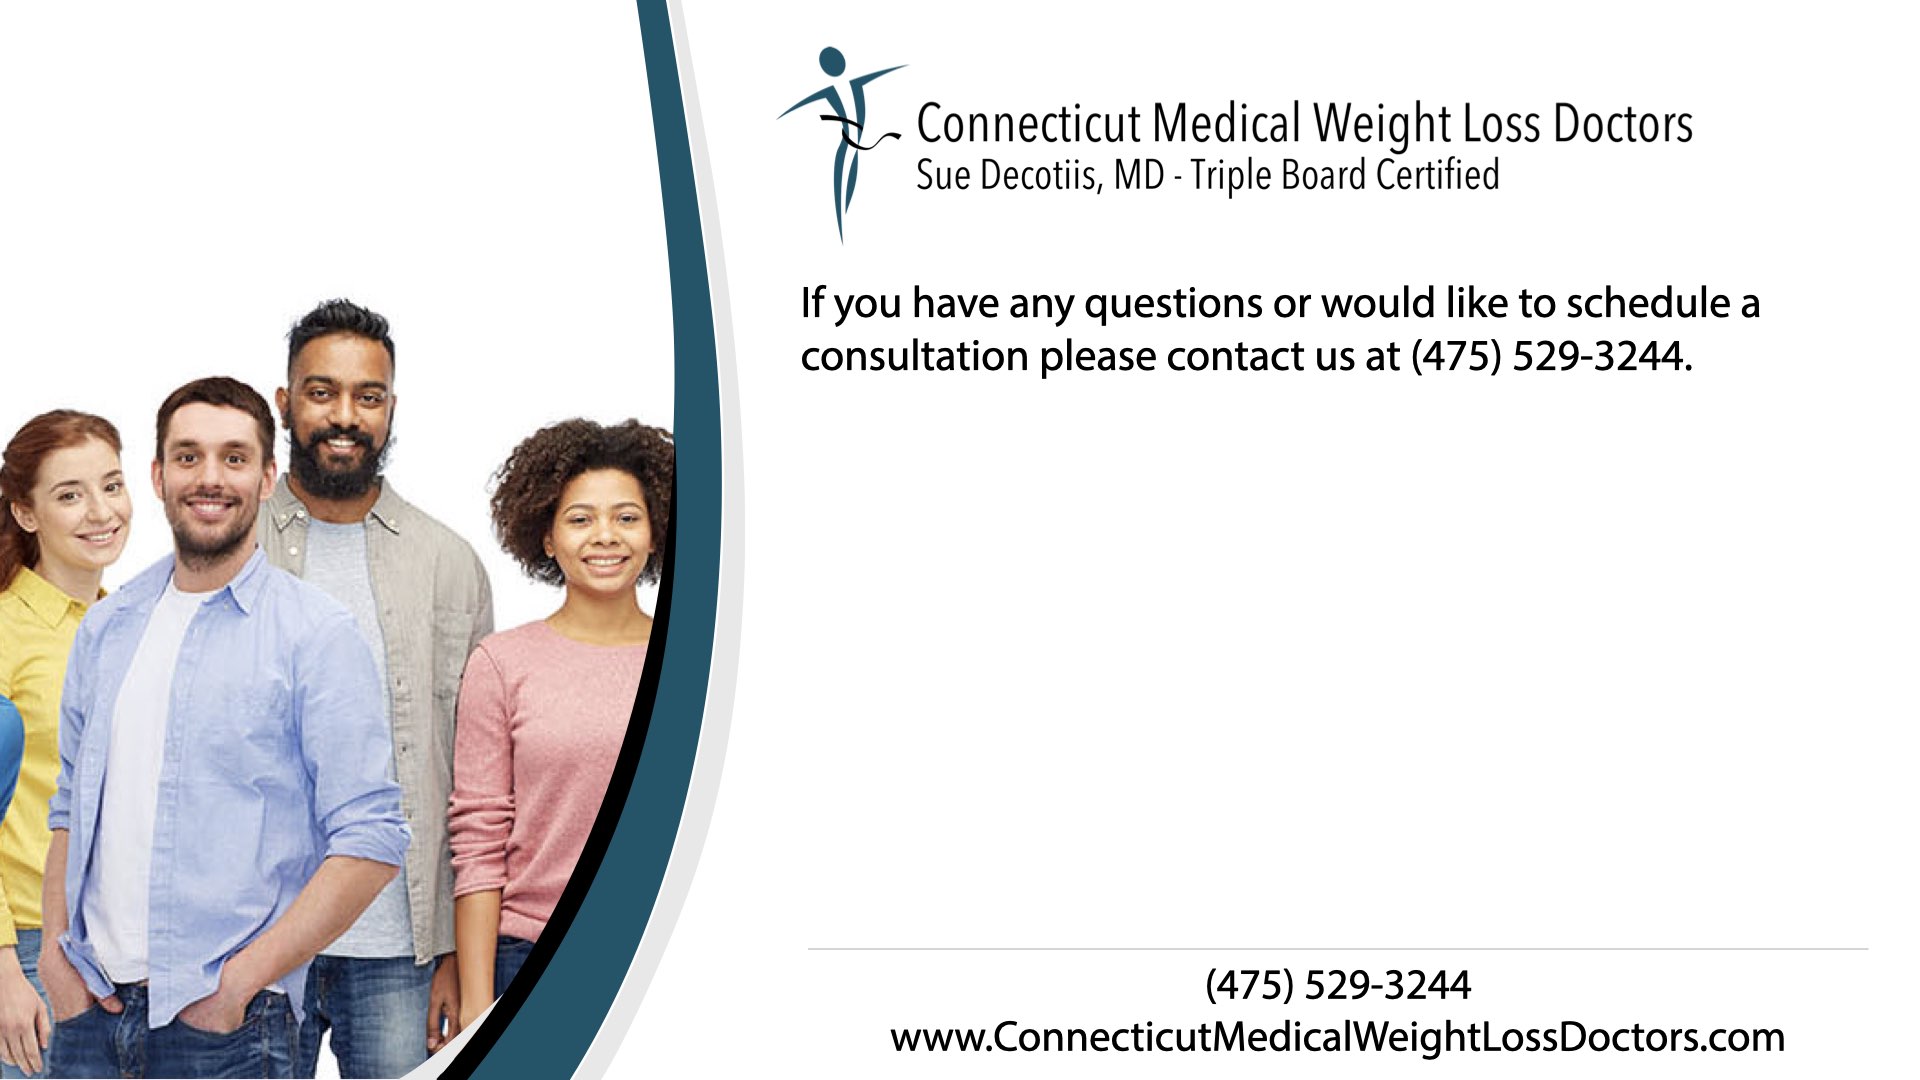 Connecticut Medical Weight Loss Doctors - Contact Us